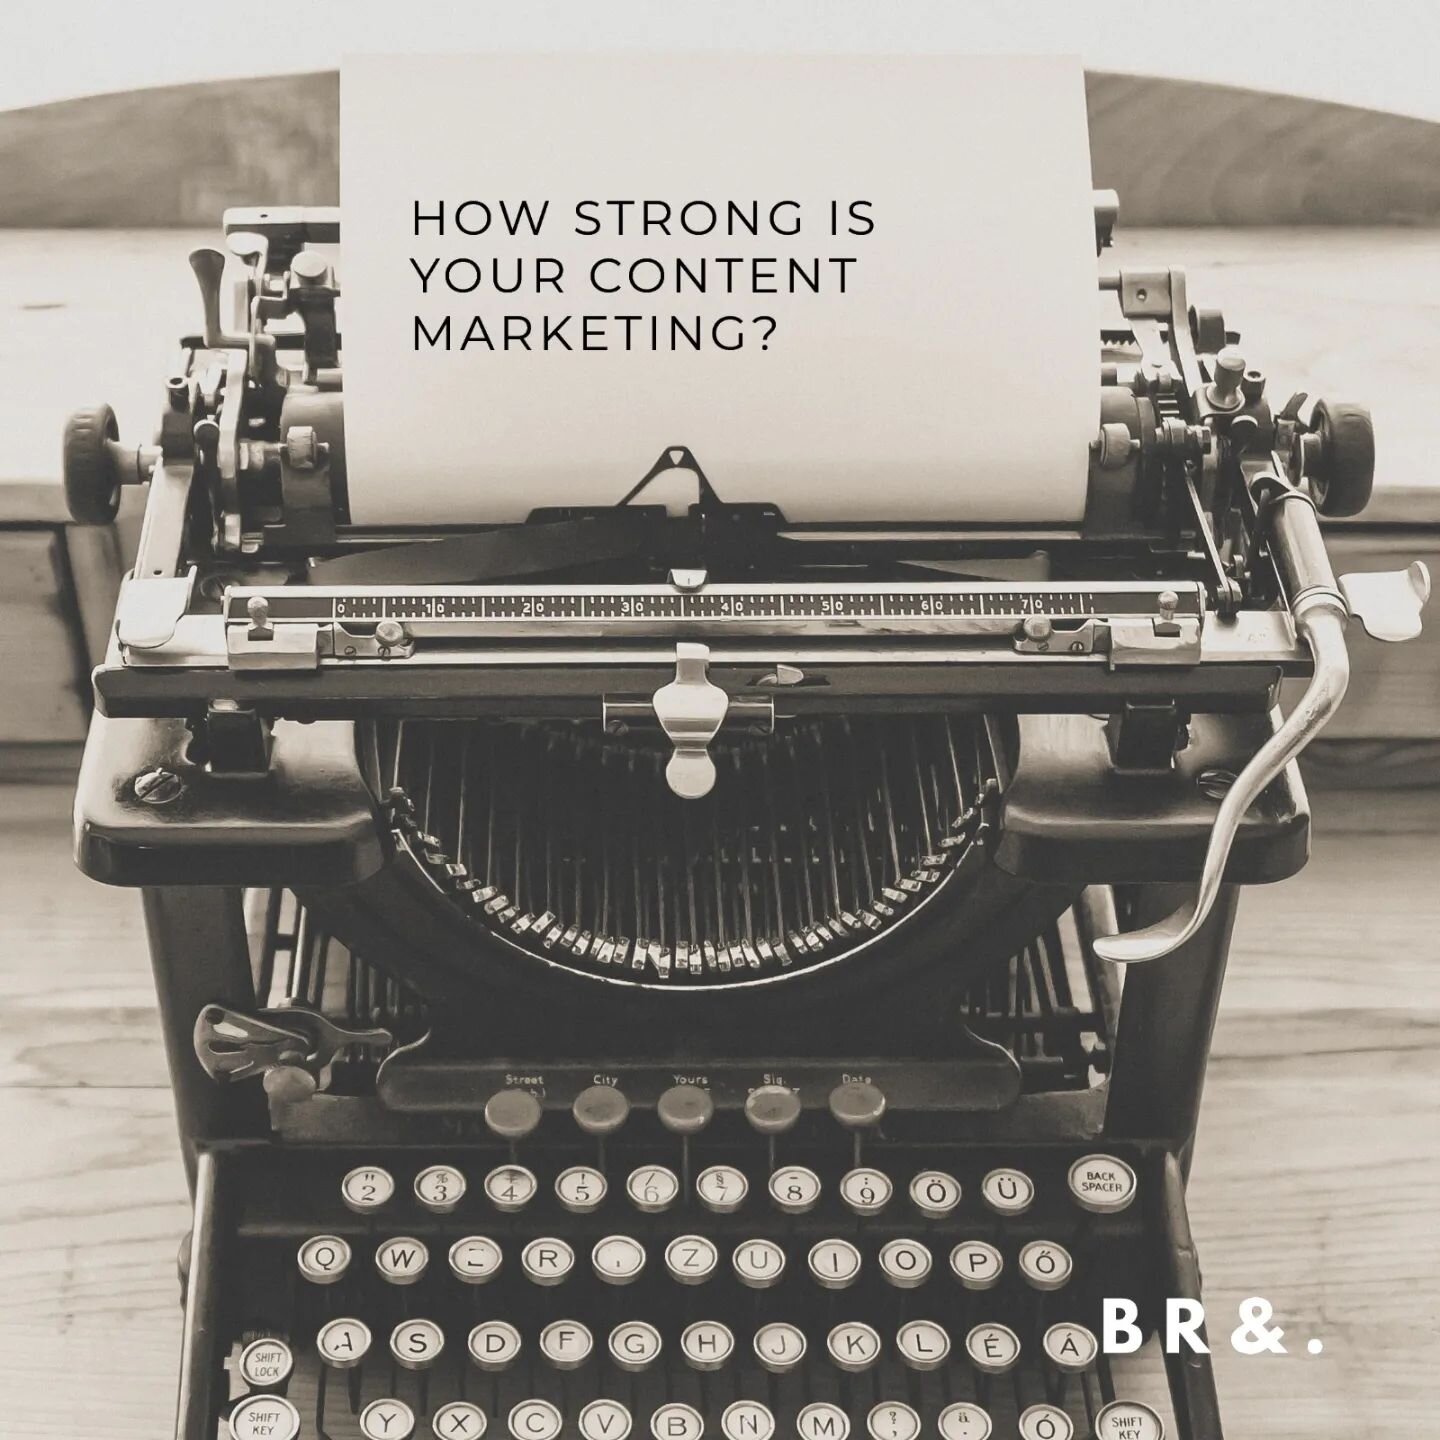 From brand perception to building strong SEO, content marketing is pivotal to creating a foundation for your brand.

Got some questions? Drop us a line!

#wearebrand #growyourbrand